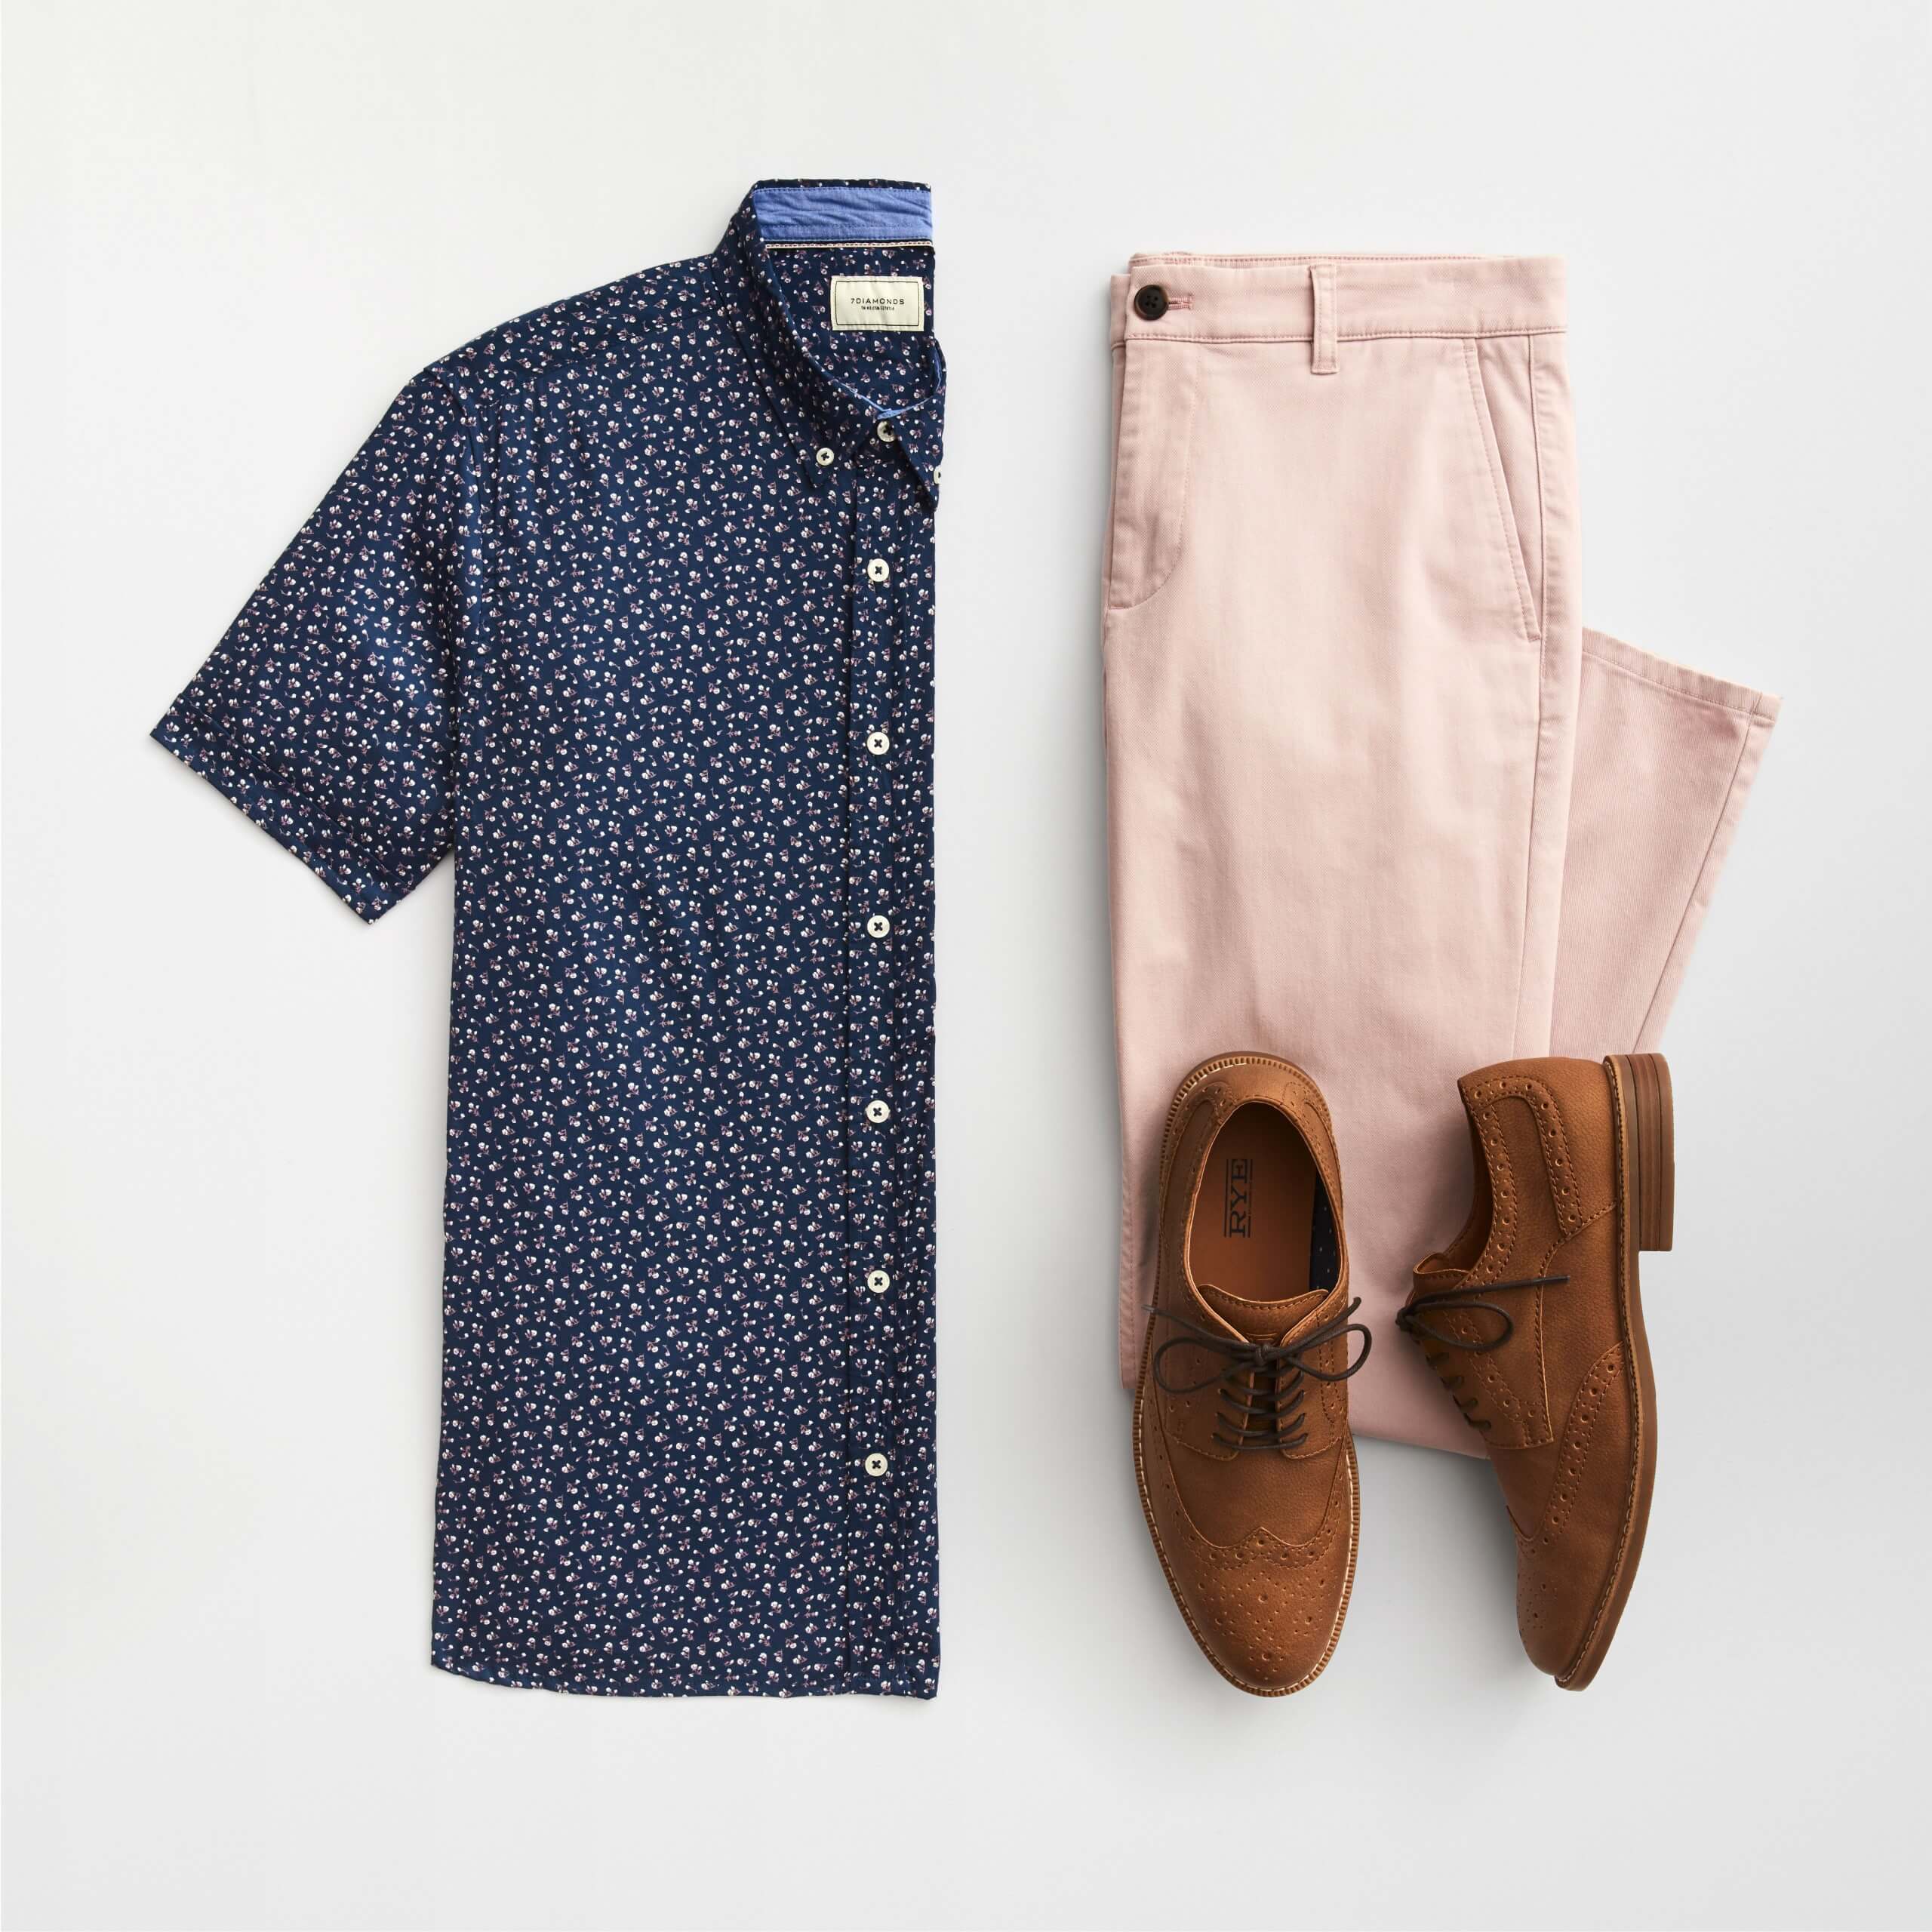 Cocktail Attire for Men | Personal Styling | Stitch Fix